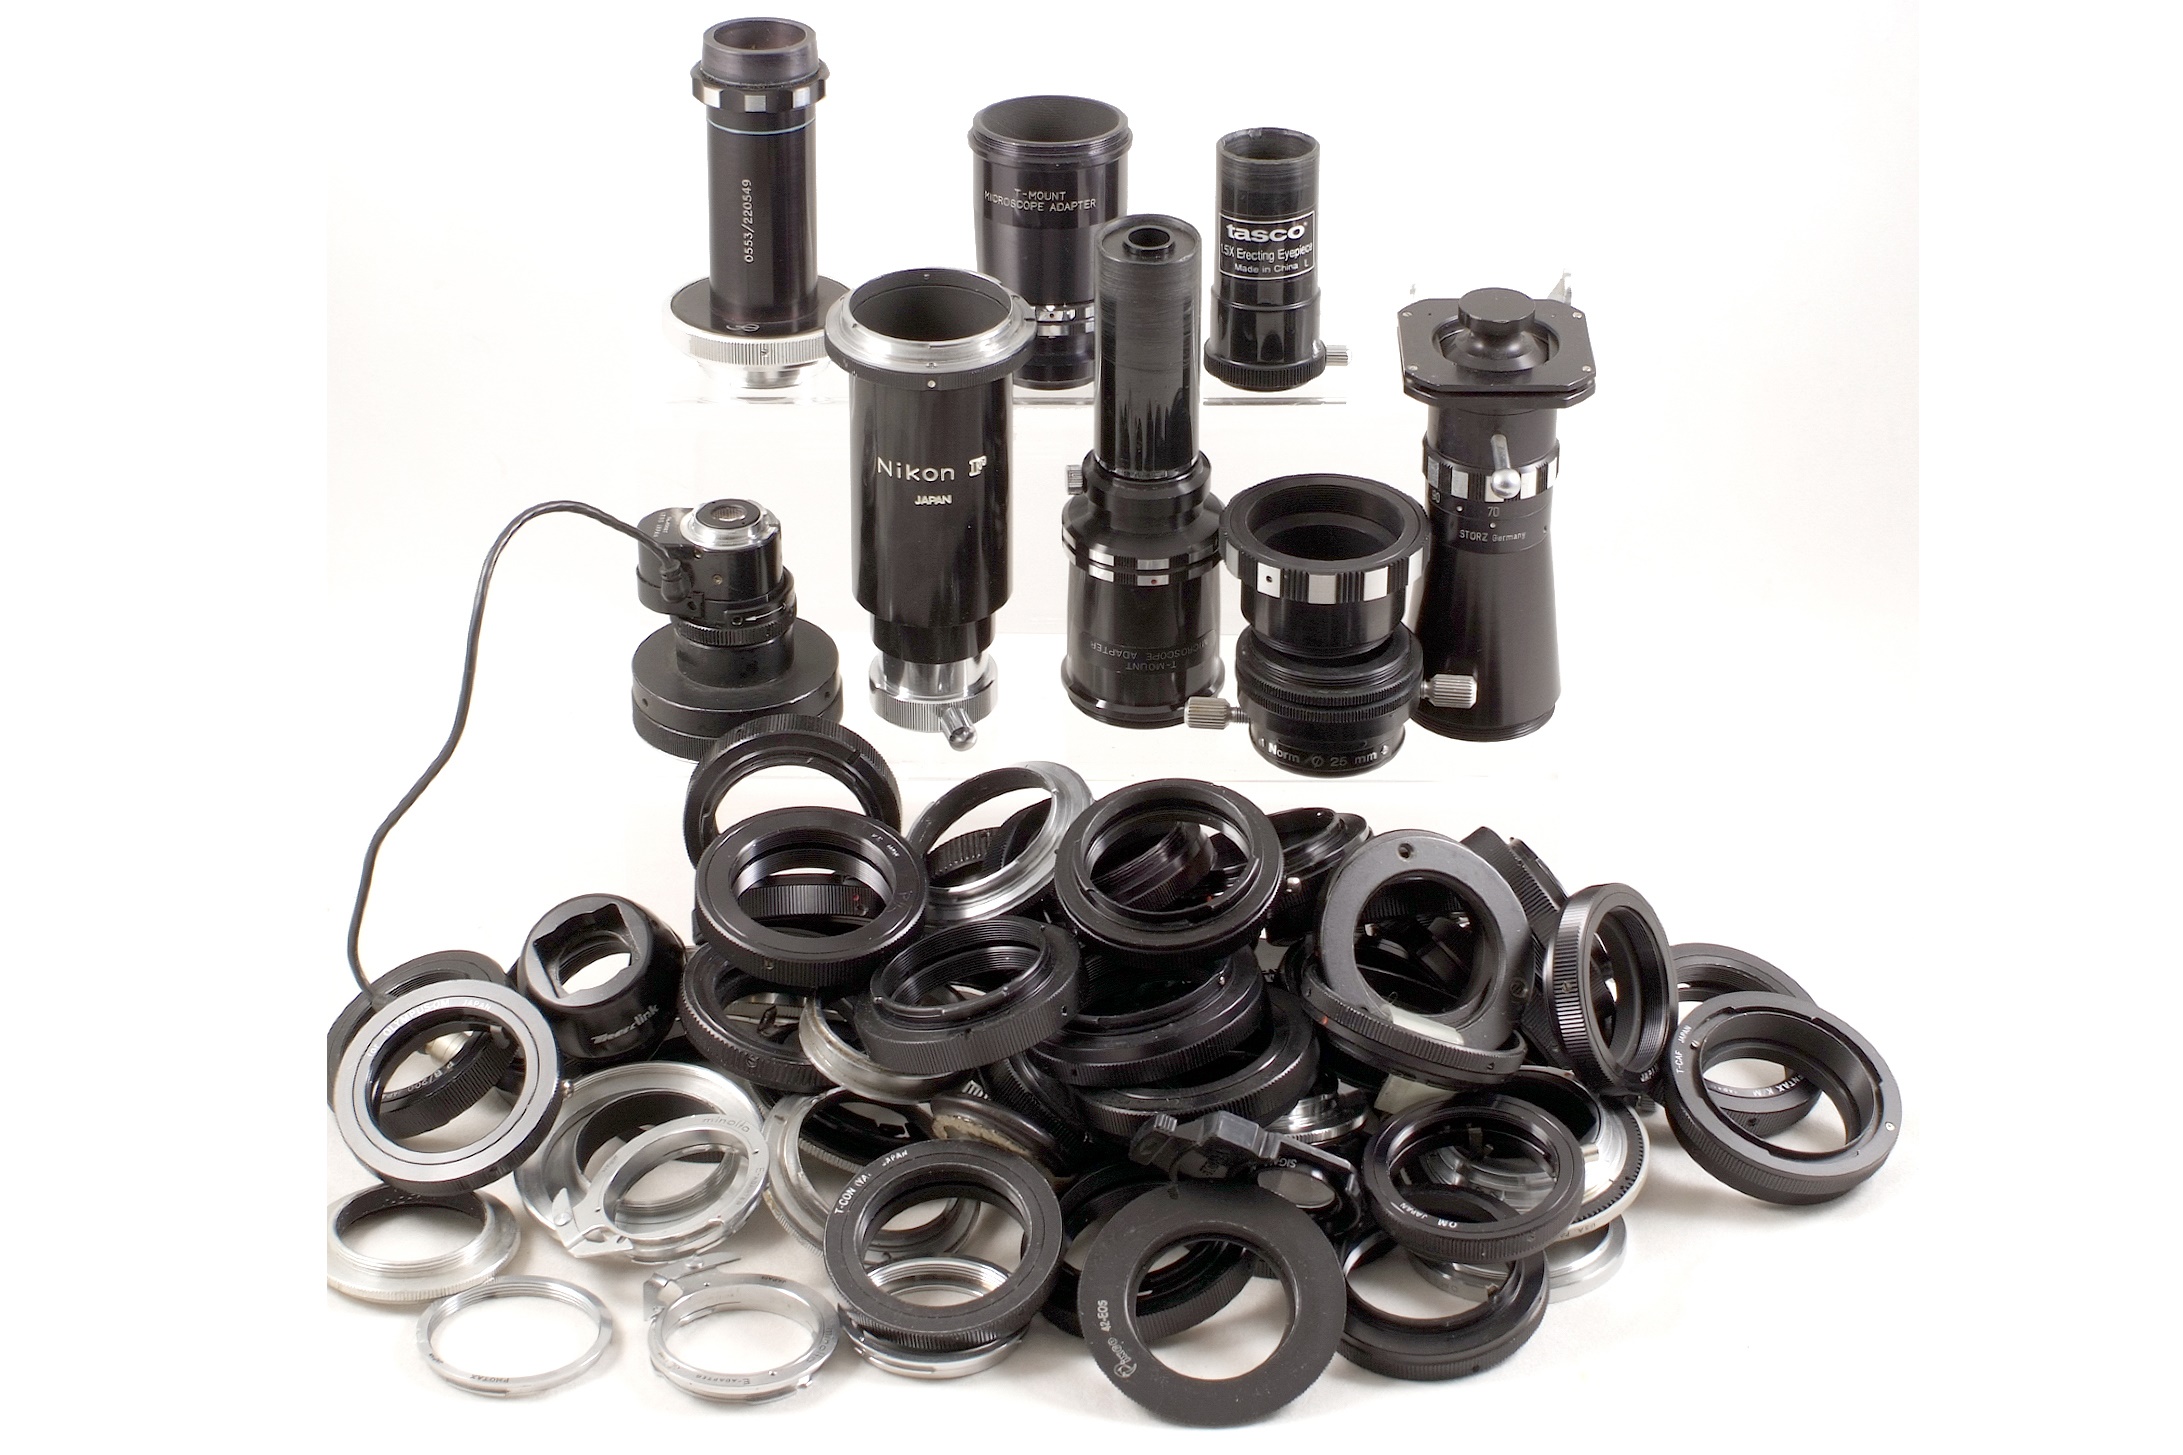 Large Quantity of Lens Mounts, Plus Microscope and Other Adaptors.